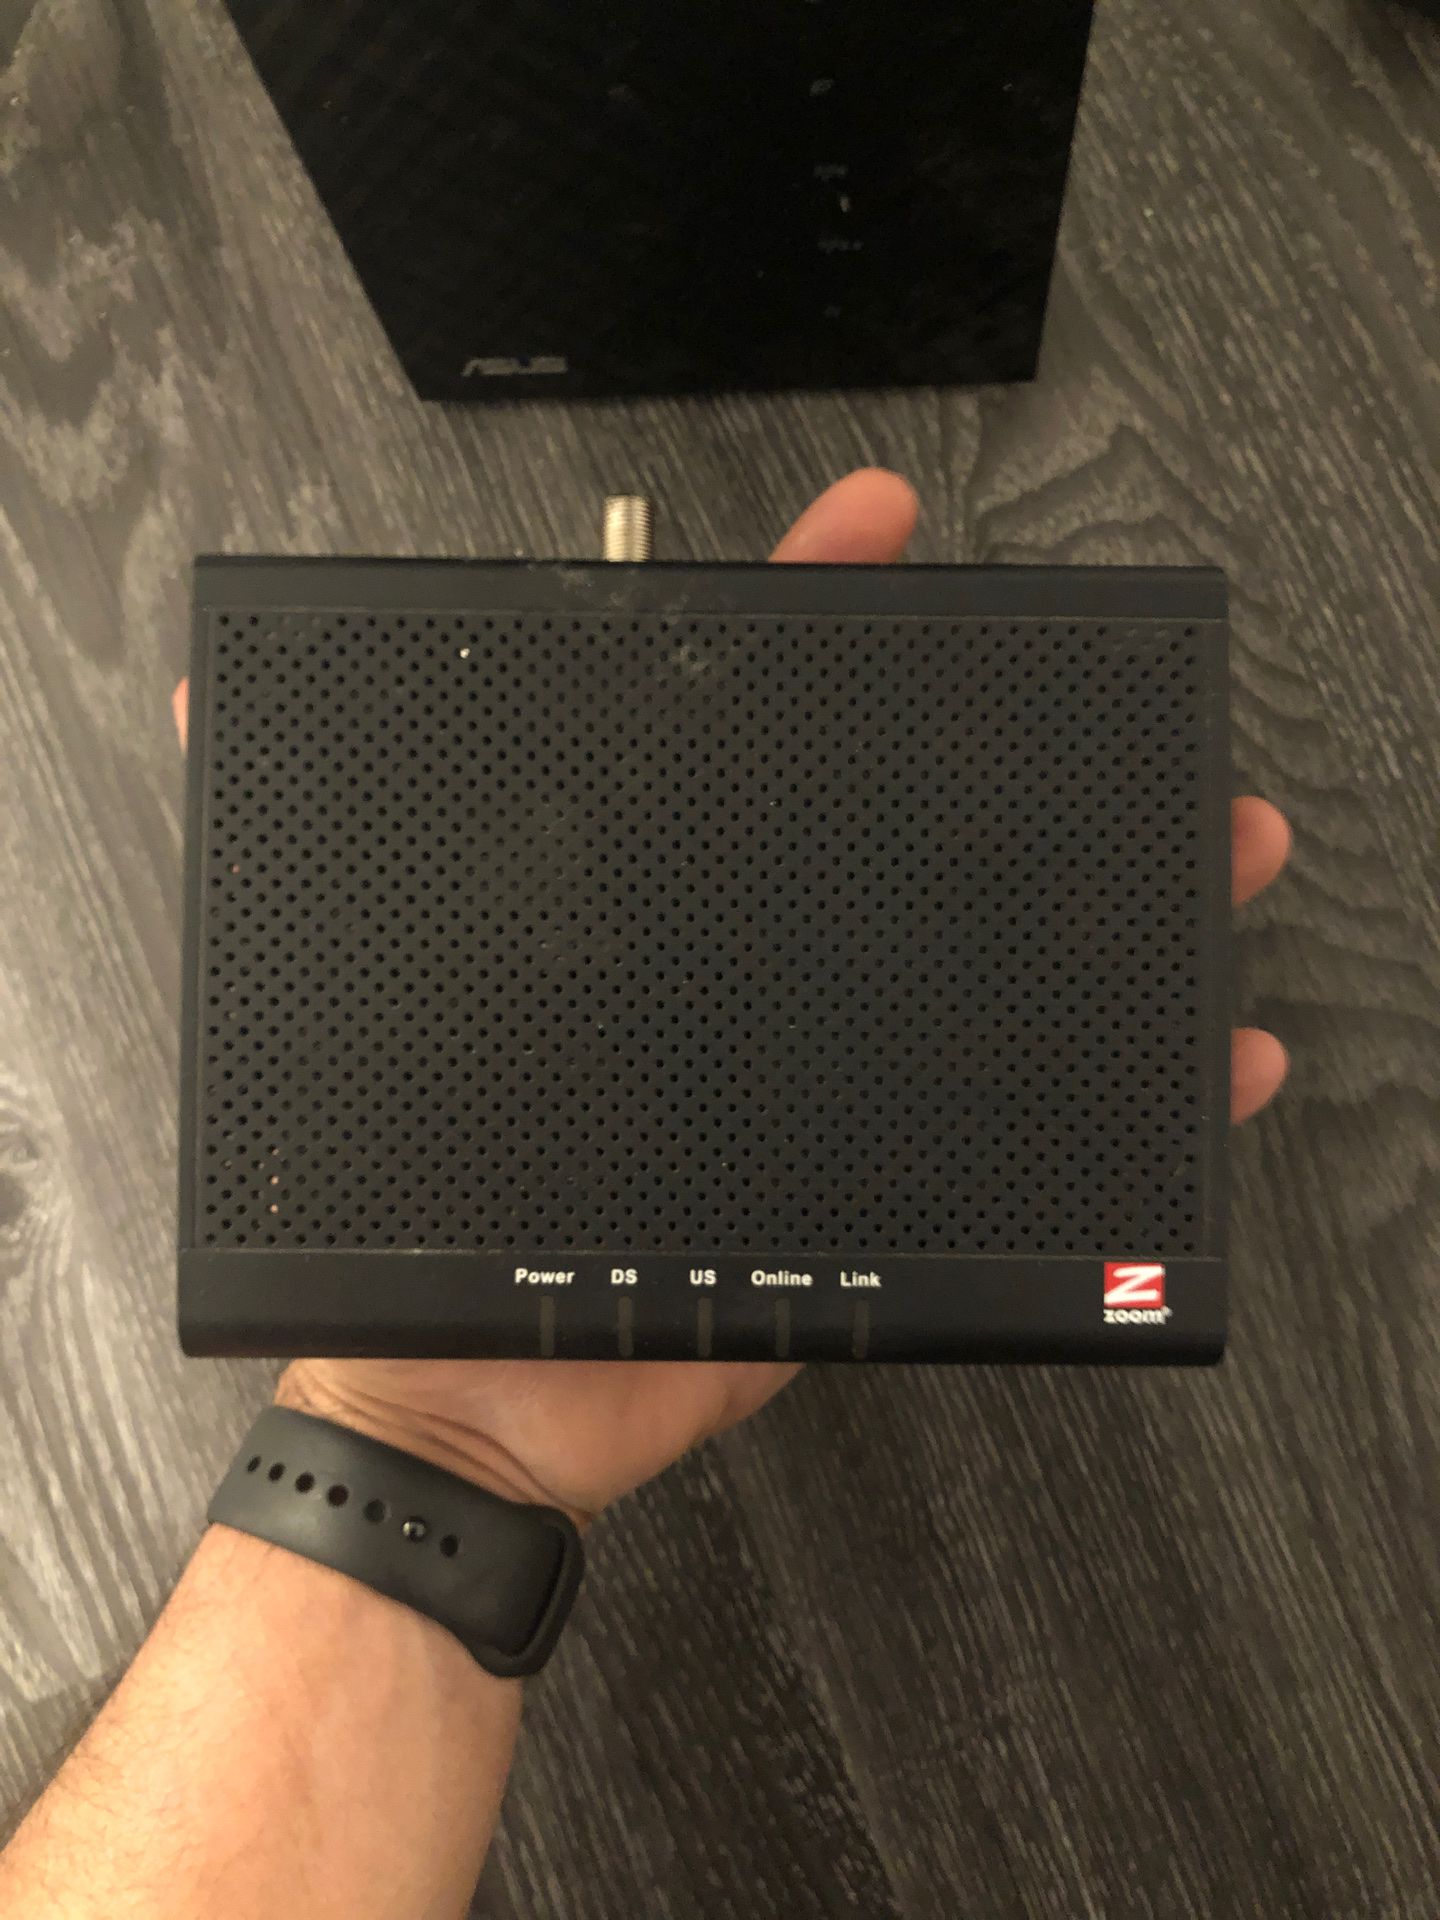 Cable Modem Zoom 3.0